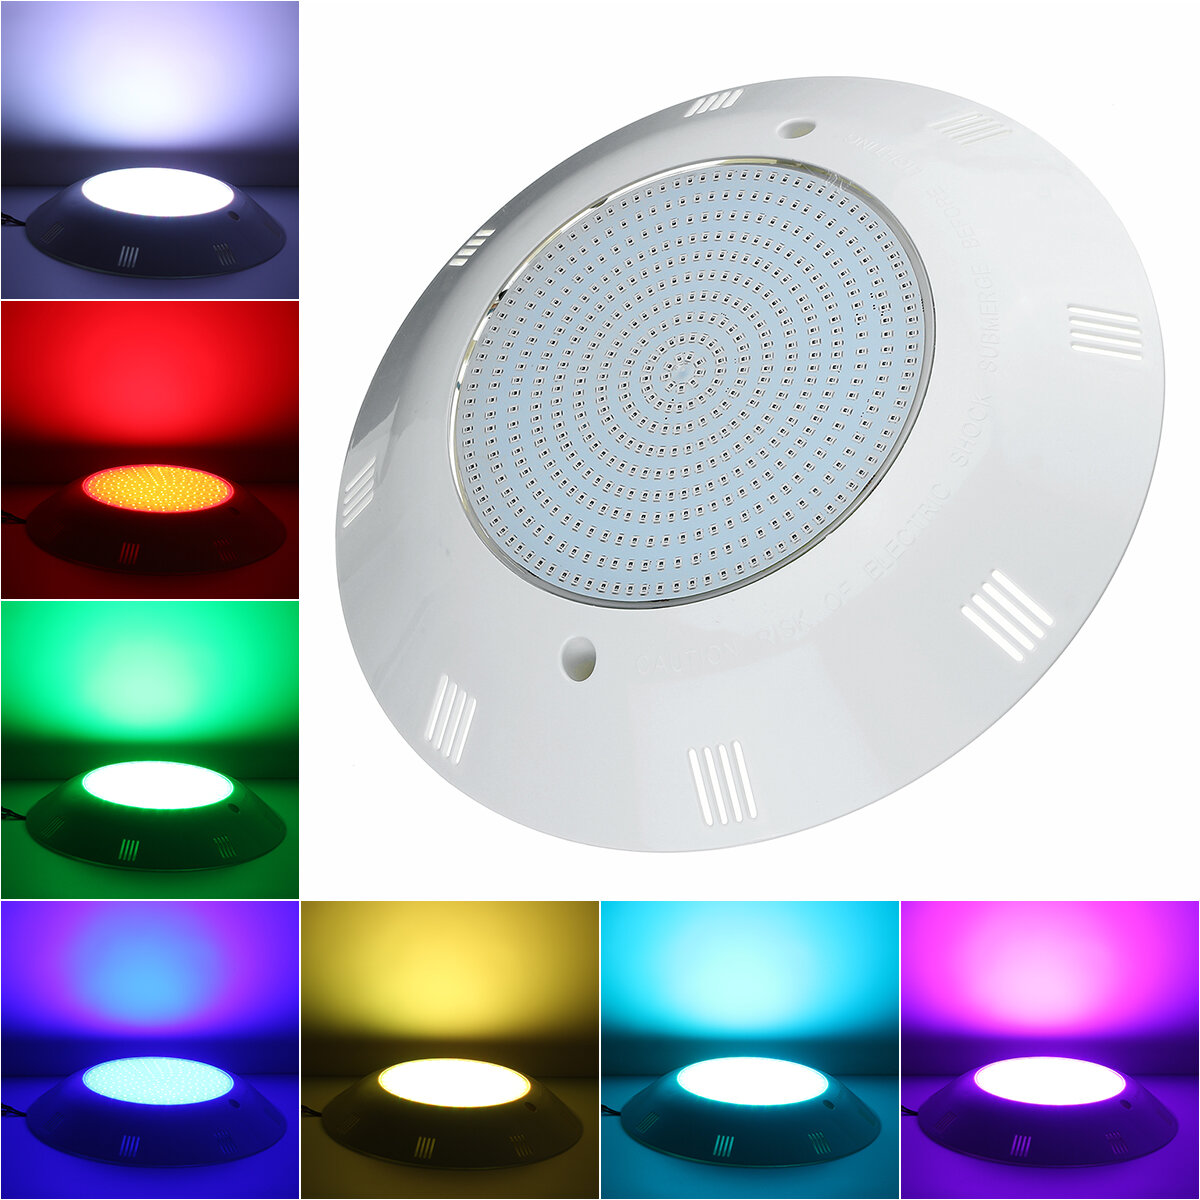 

531LED RGB Underwater Swimming Pool Light IP68 Fountain Lamp + Remote Control